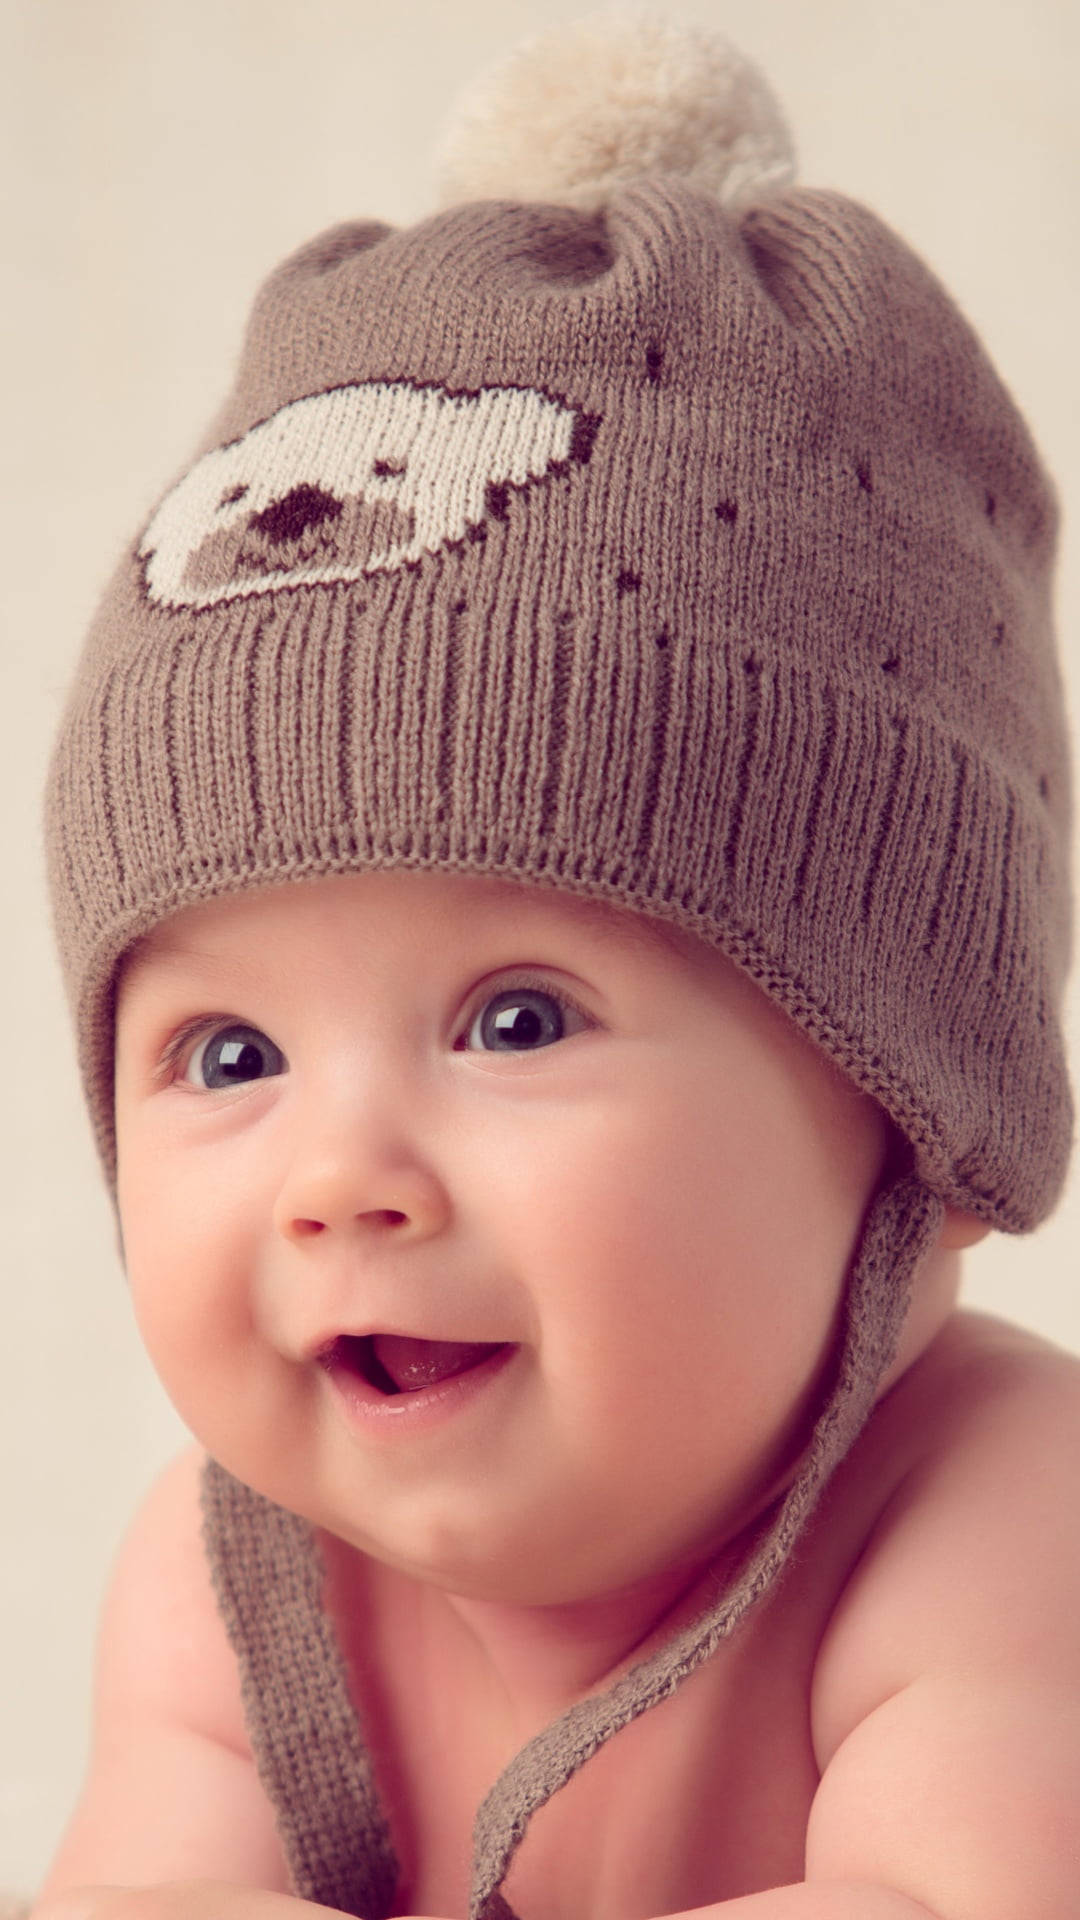 Cute Baby With A Bonnet Wallpaper